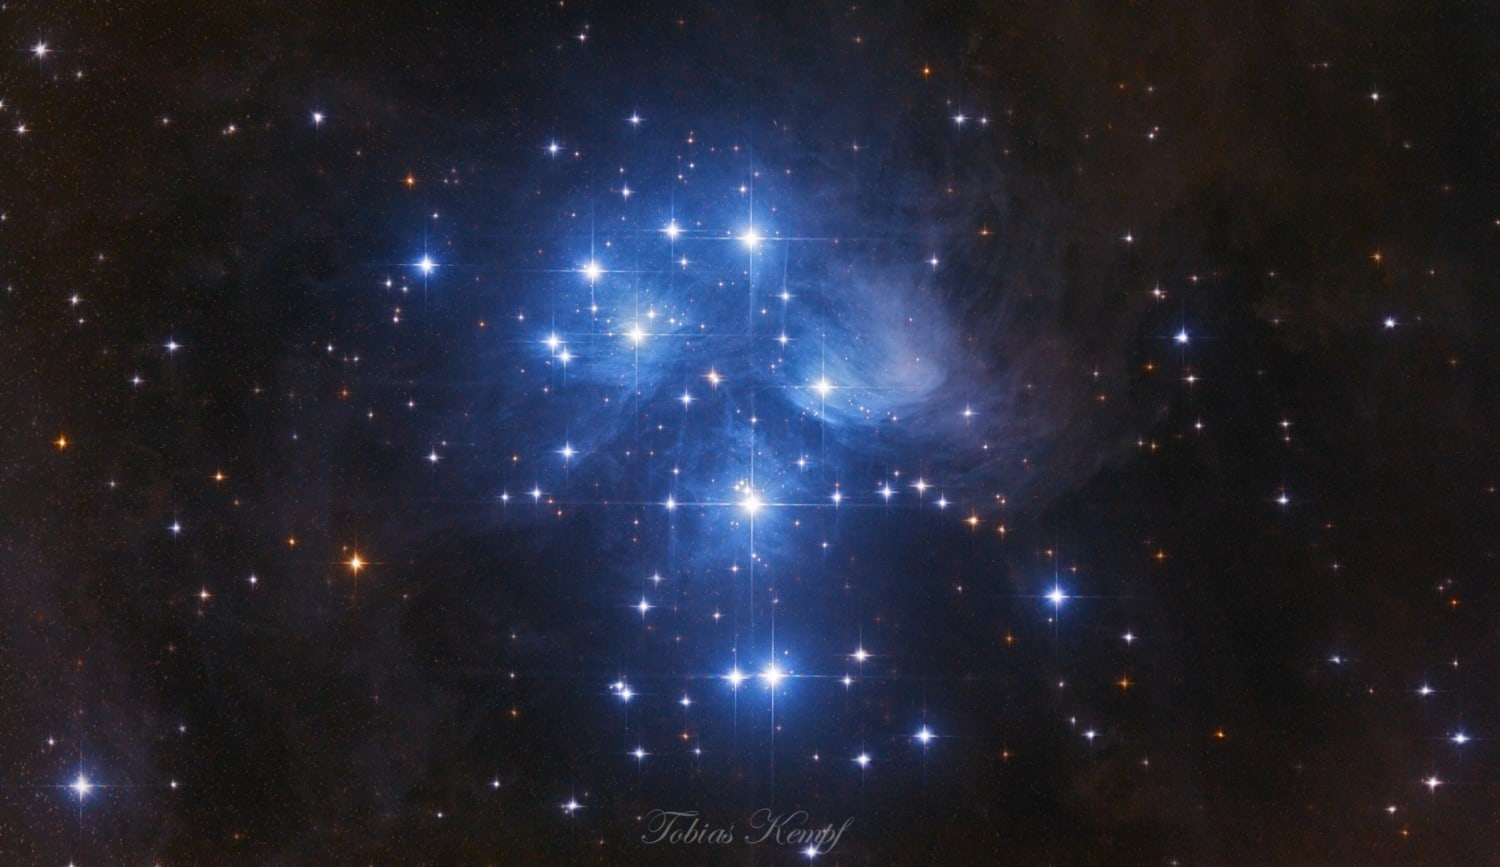 I Captured The Pleiades Star Cluster from my Backyard with a DSLR